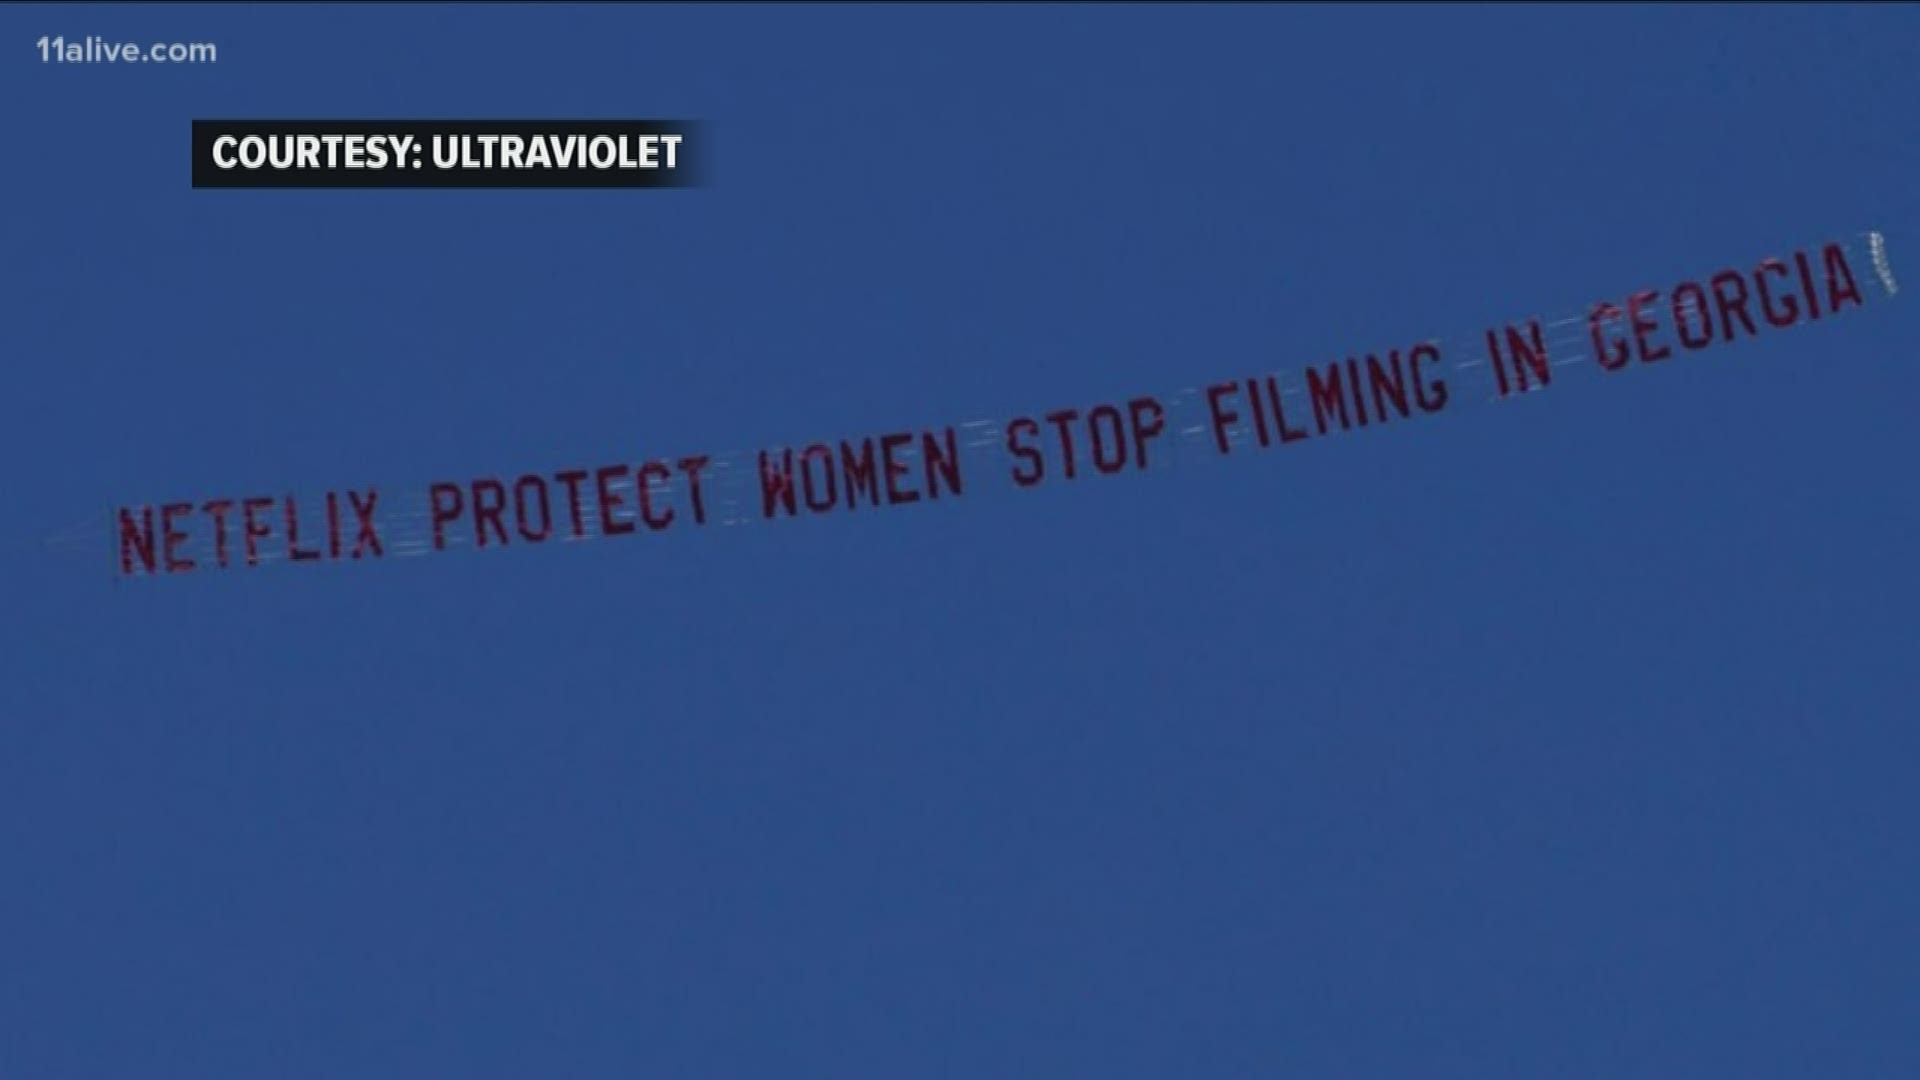 A company flew the banner over Netflix headquarters in California on Friday.